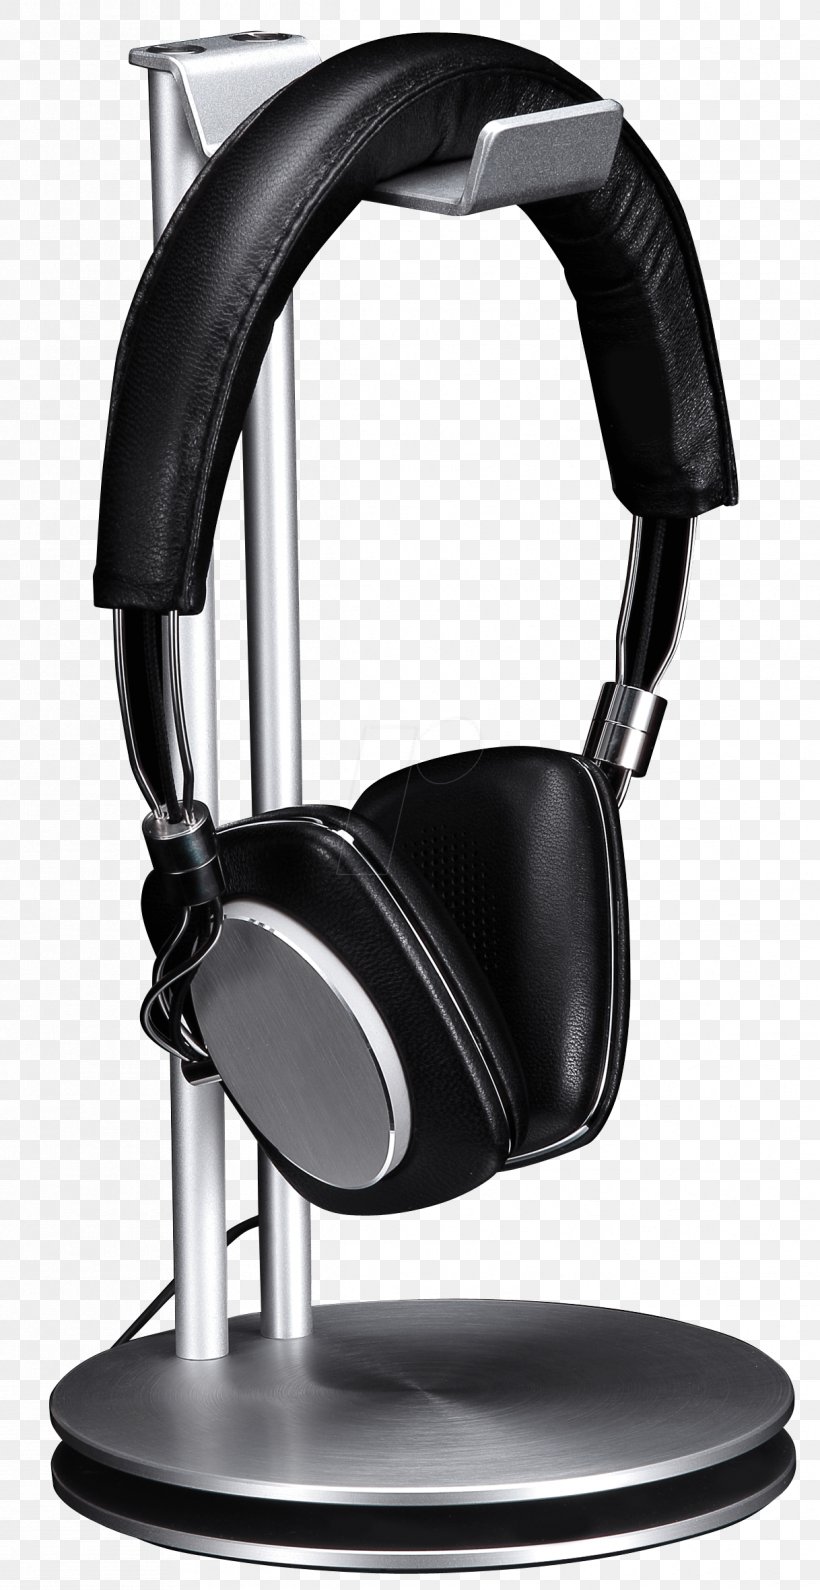 Headphones Just Mobile HeadStand Avant A4tech HS-100 Stereo Gaming Headset Office Headphone With Aux Mic Split Aluminium Amazon.com, PNG, 1218x2362px, Headphones, Aluminium, Amazoncom, Audio, Audio Equipment Download Free